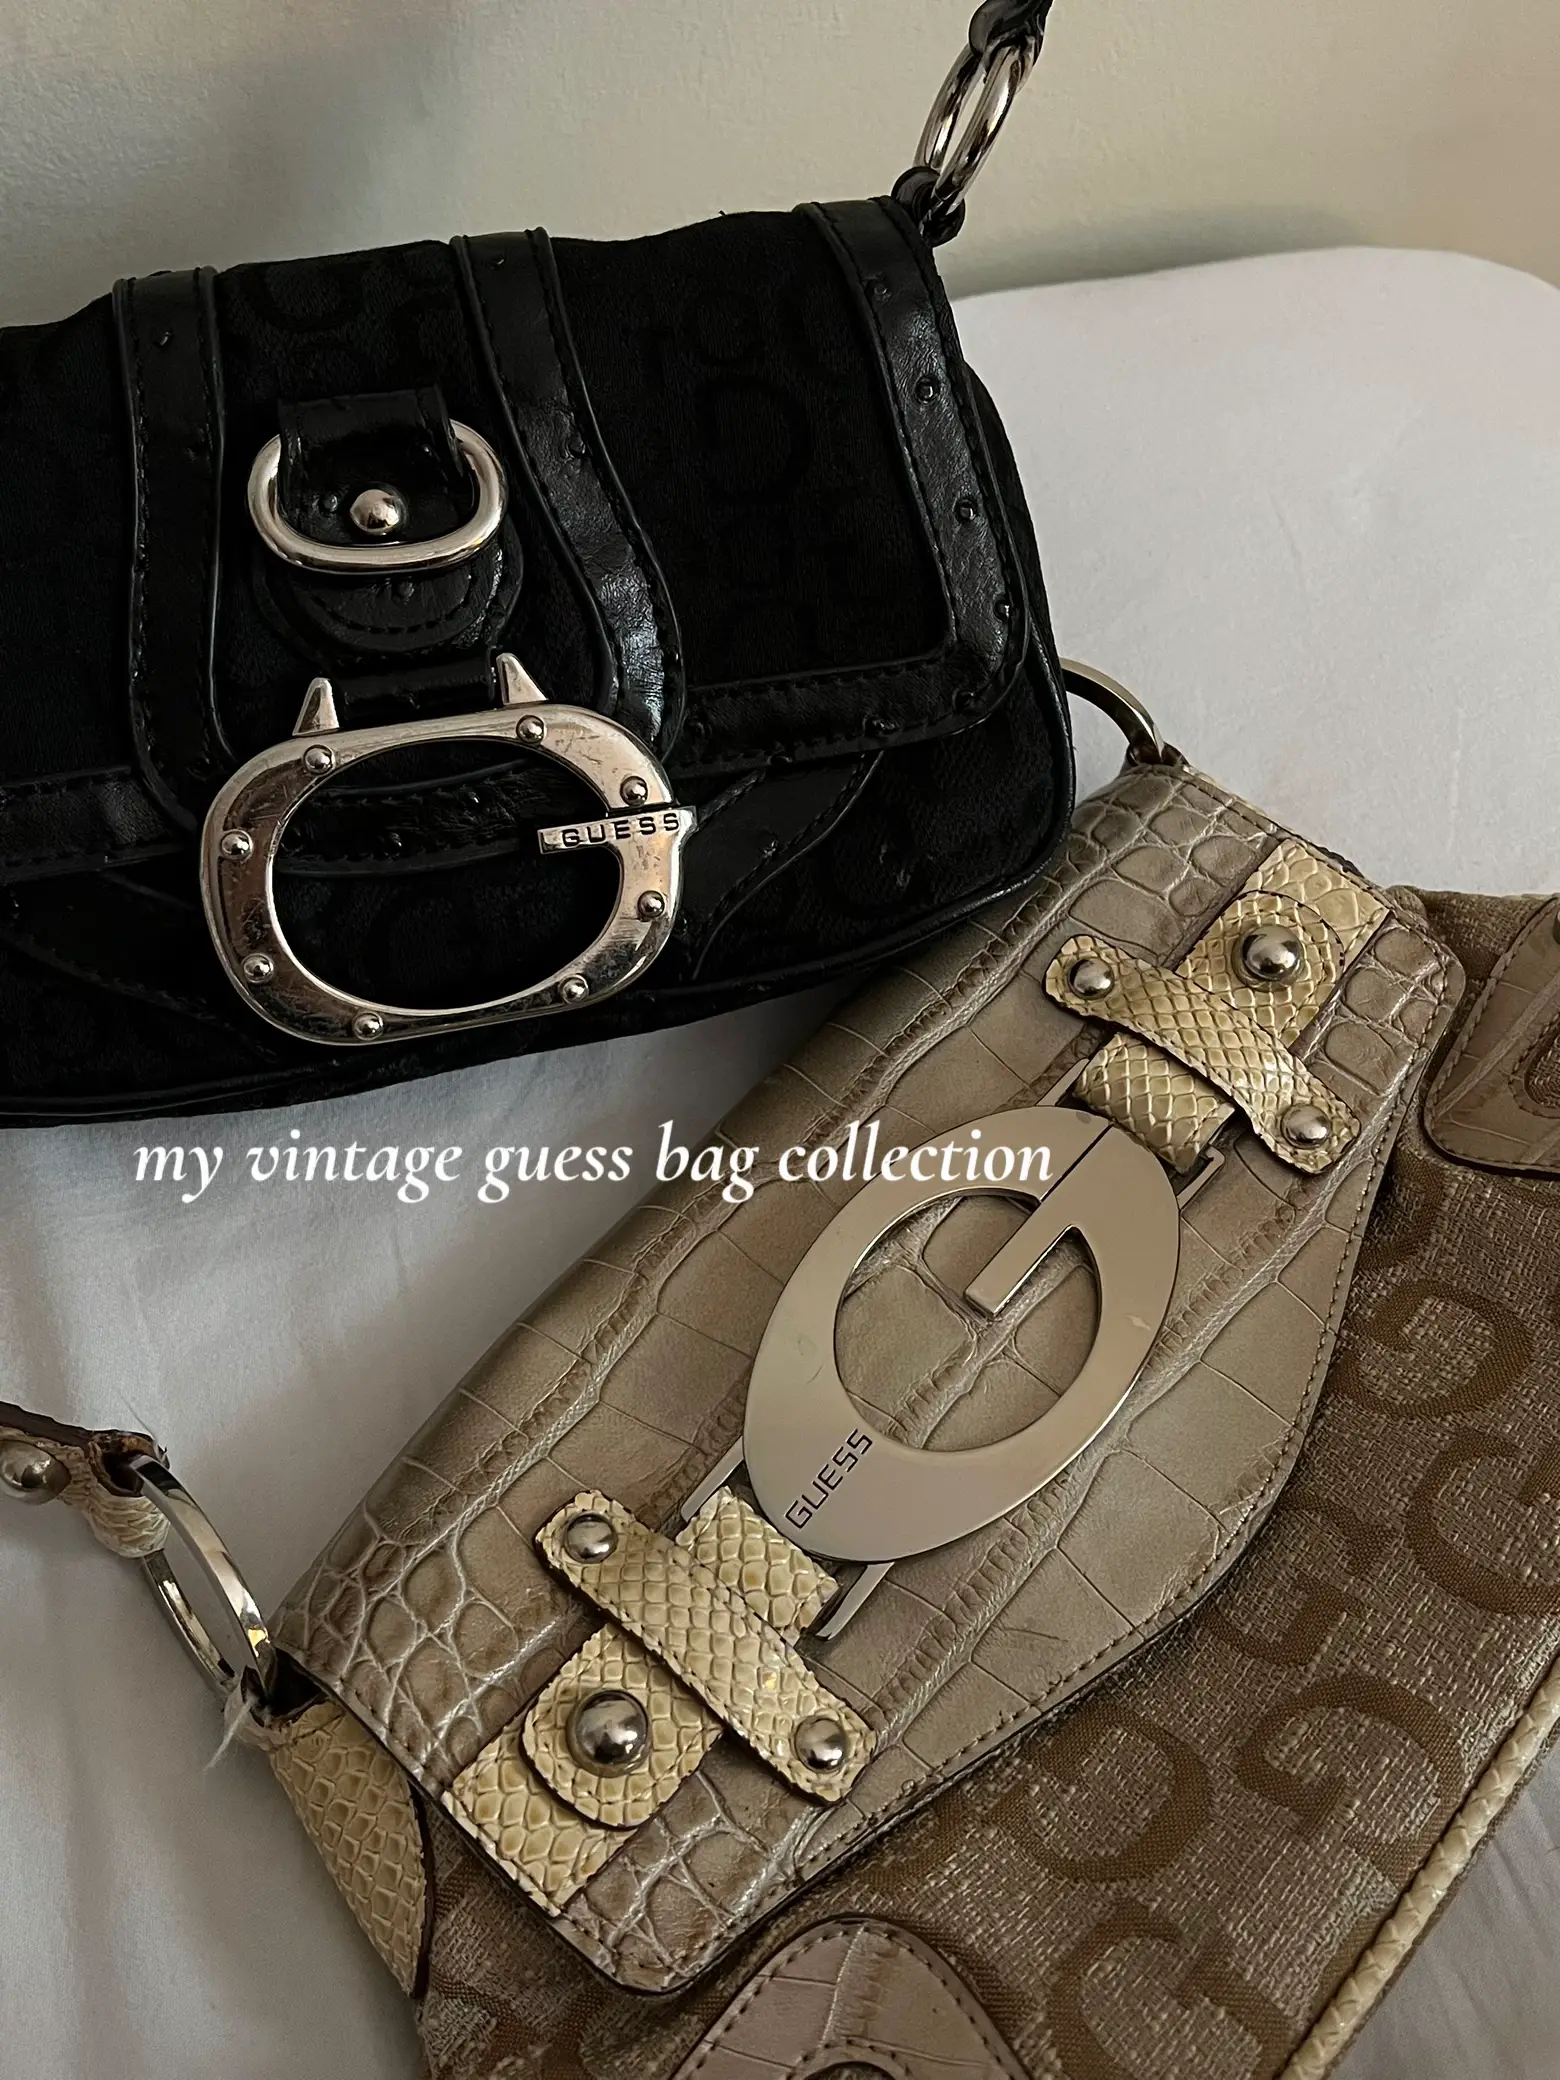 Guess, Bags, Black Guess Wallet